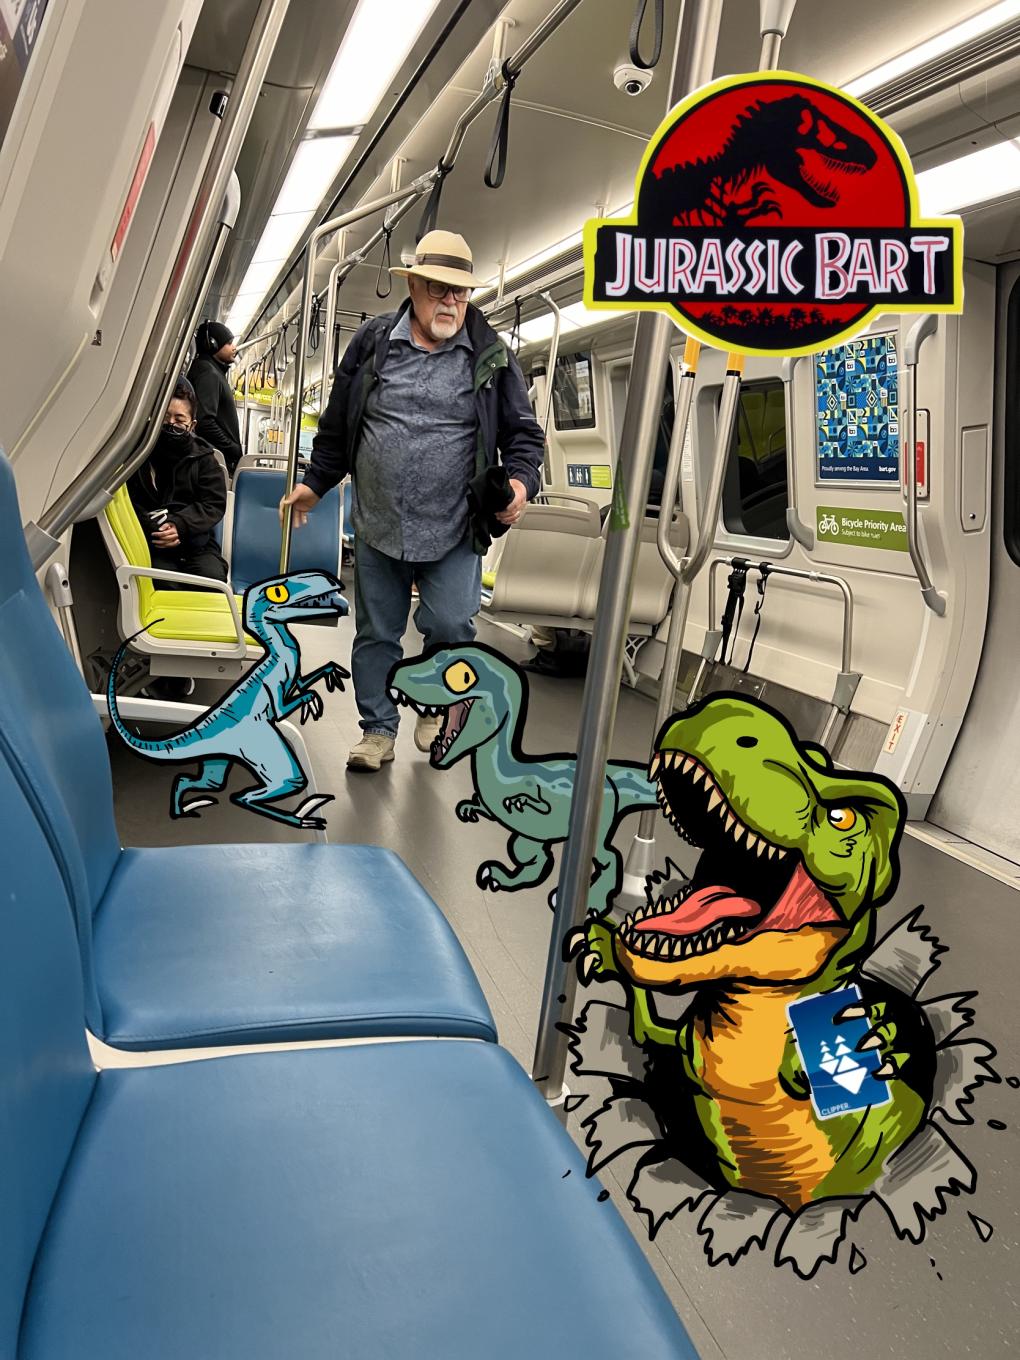 An illustration of dinosaurs on BART with a Jurassic Park logo and a man in a hat walking on the train